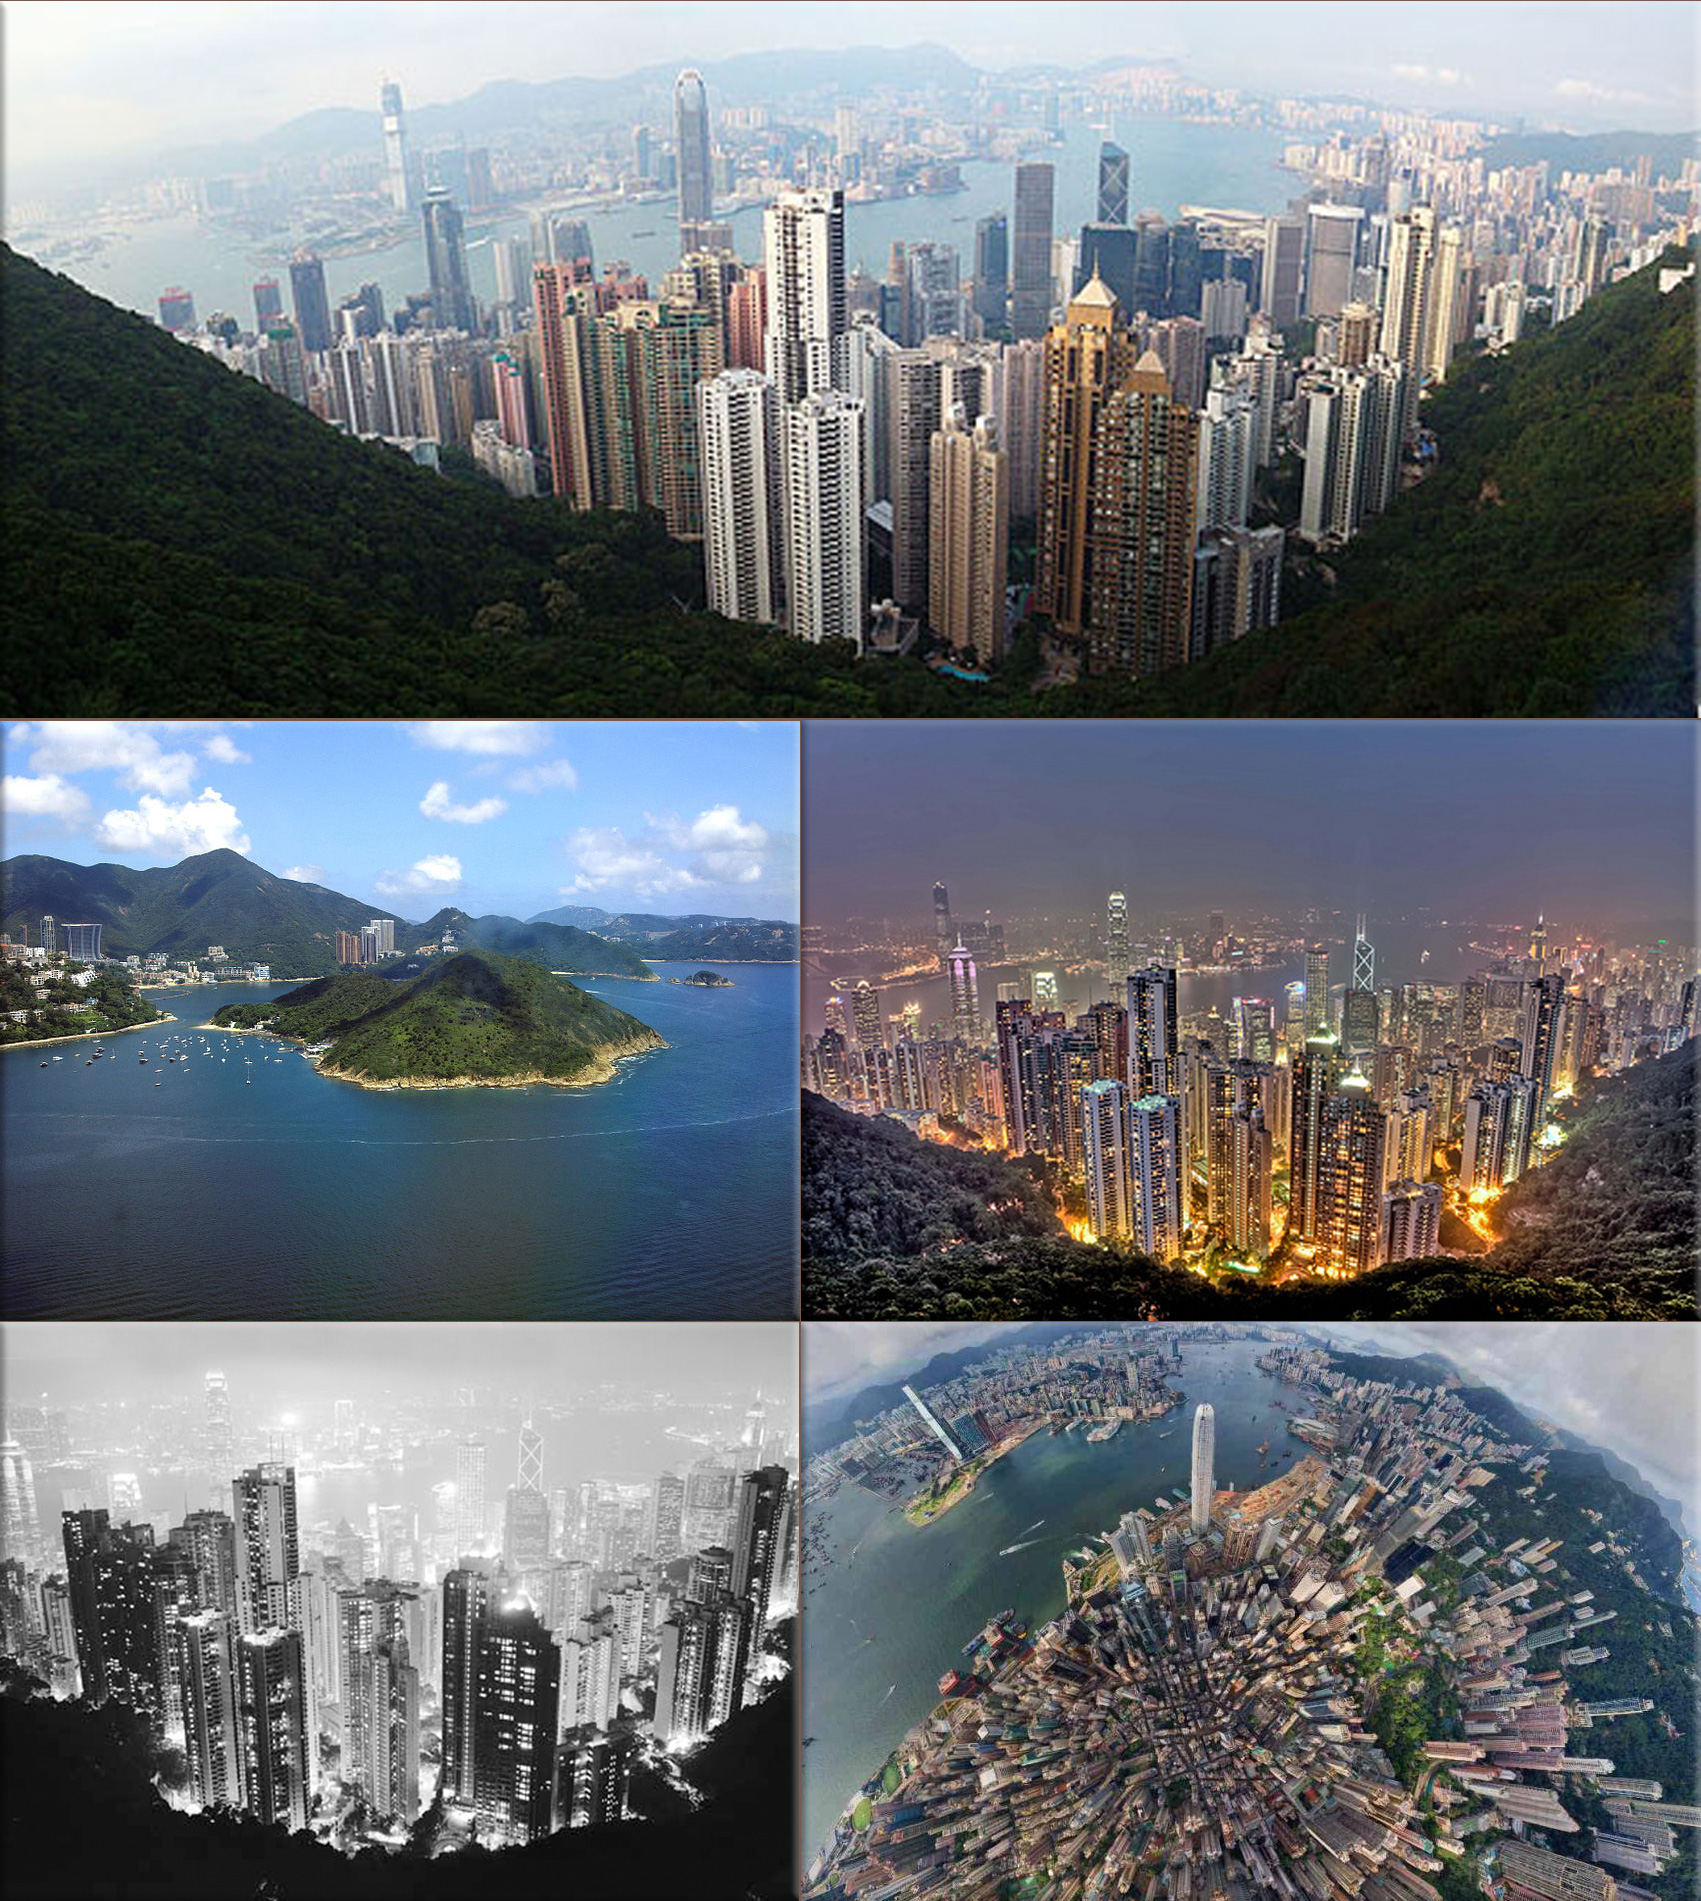 Hong Kong Island and skyline, famous sights such as 'The Peak', Ocean Park, many historical sites and  mountain ranges